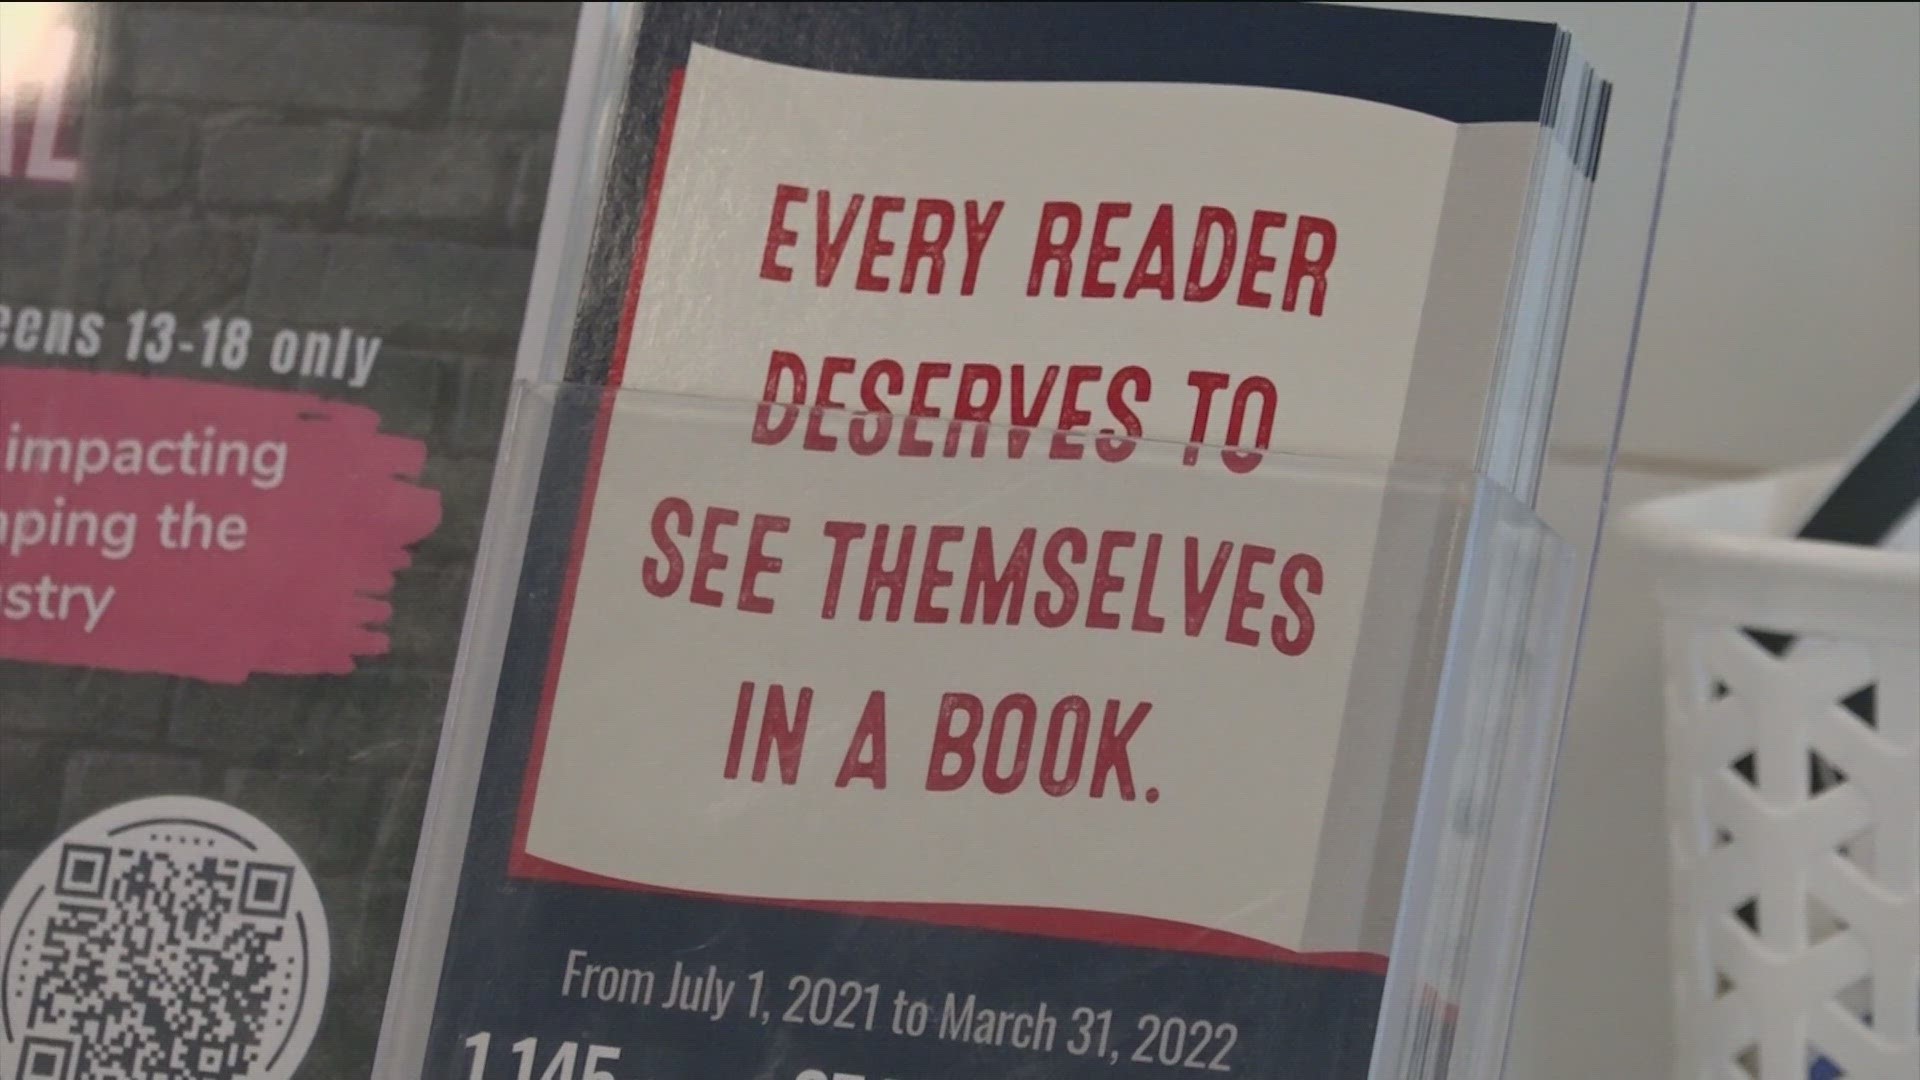 The Austin Public Library and Library Foundation are teaming up to help teens save banned books.